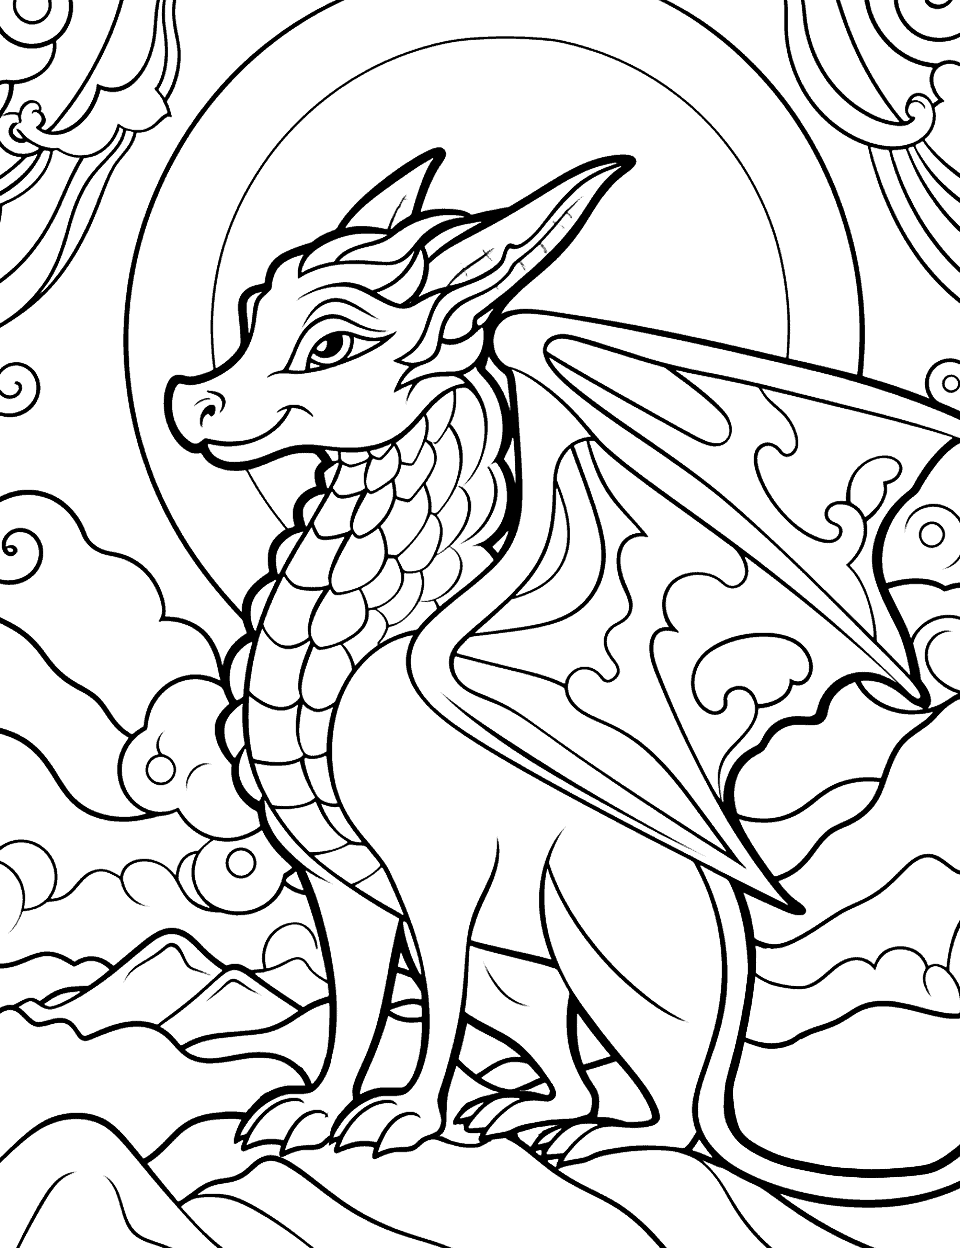 Moonlit Dragon's Journey Adult Coloring Page - A detailed scene of a dragon’s journey under a moonlit sky featuring mountains and clouds.